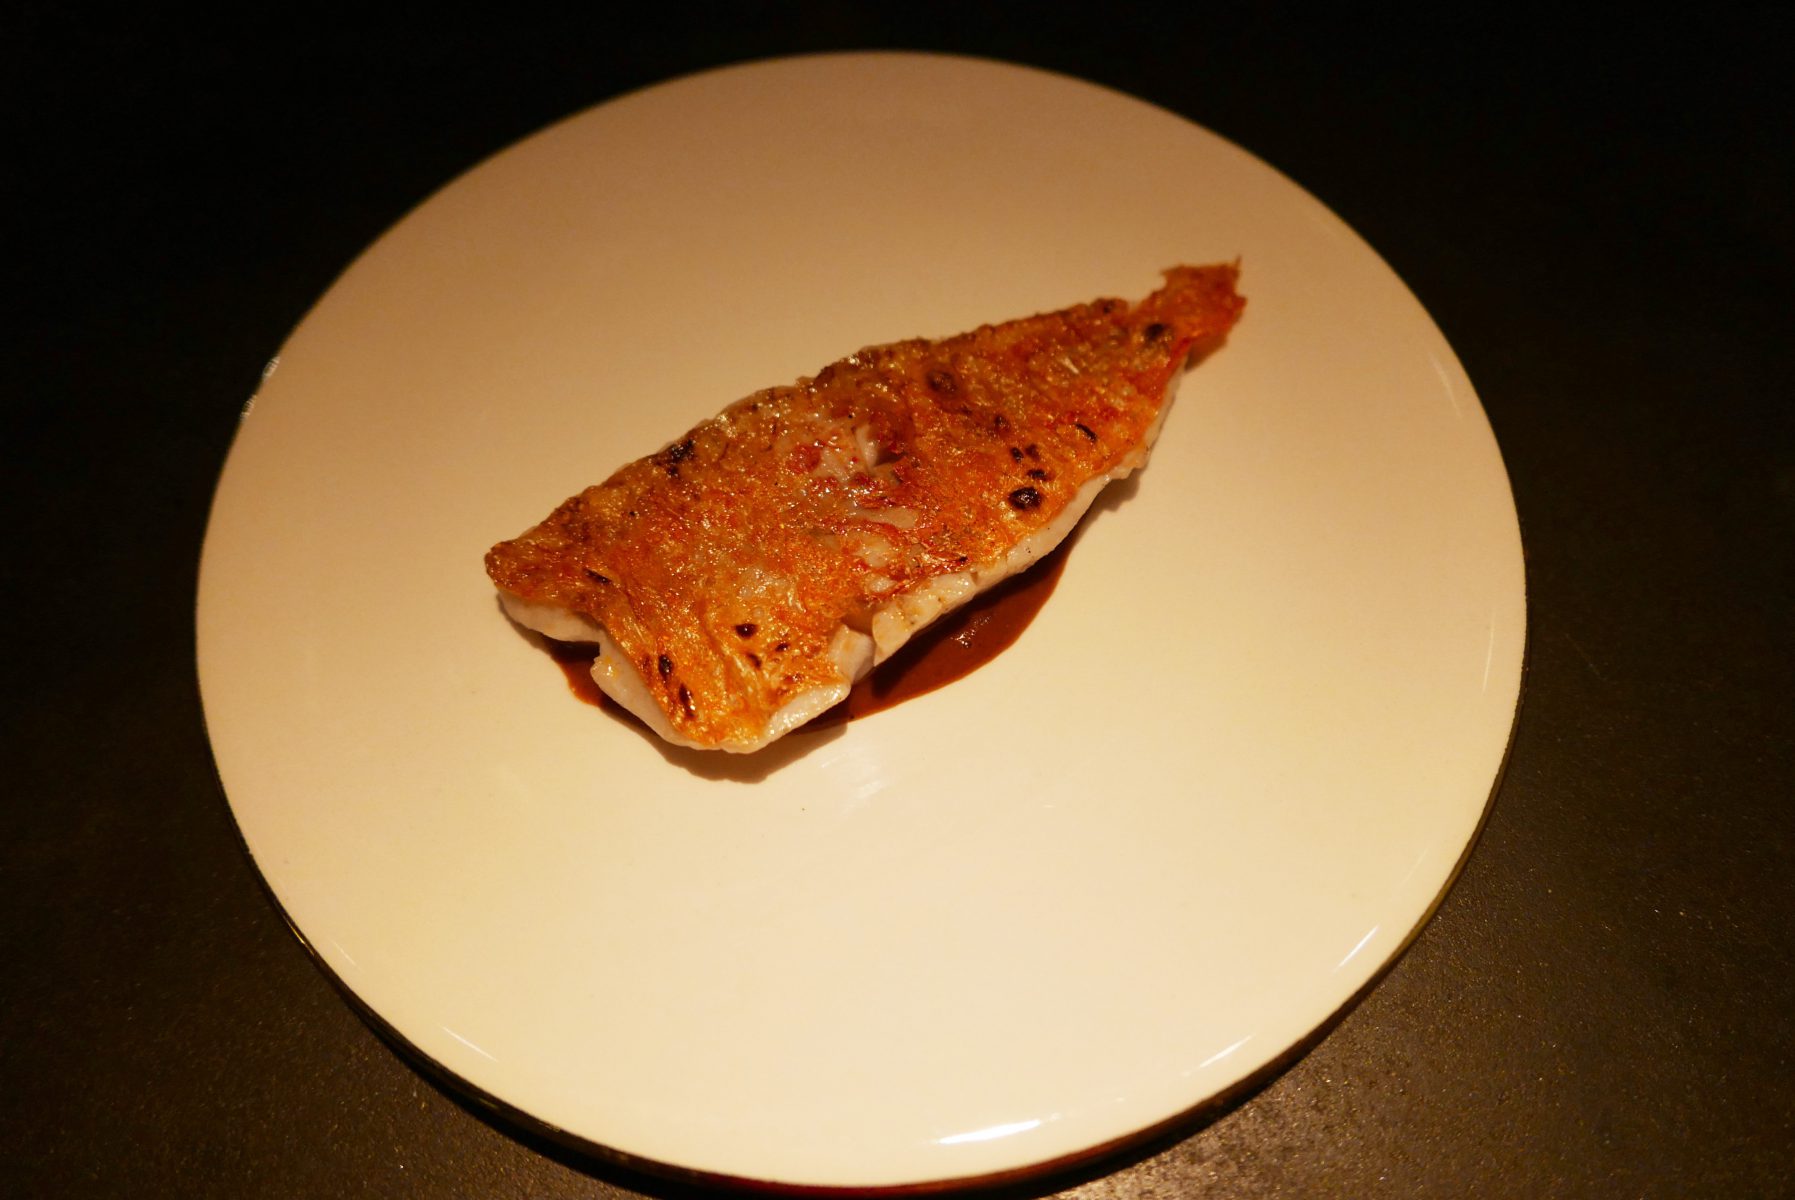 Red mullet, liver, tomato sauce